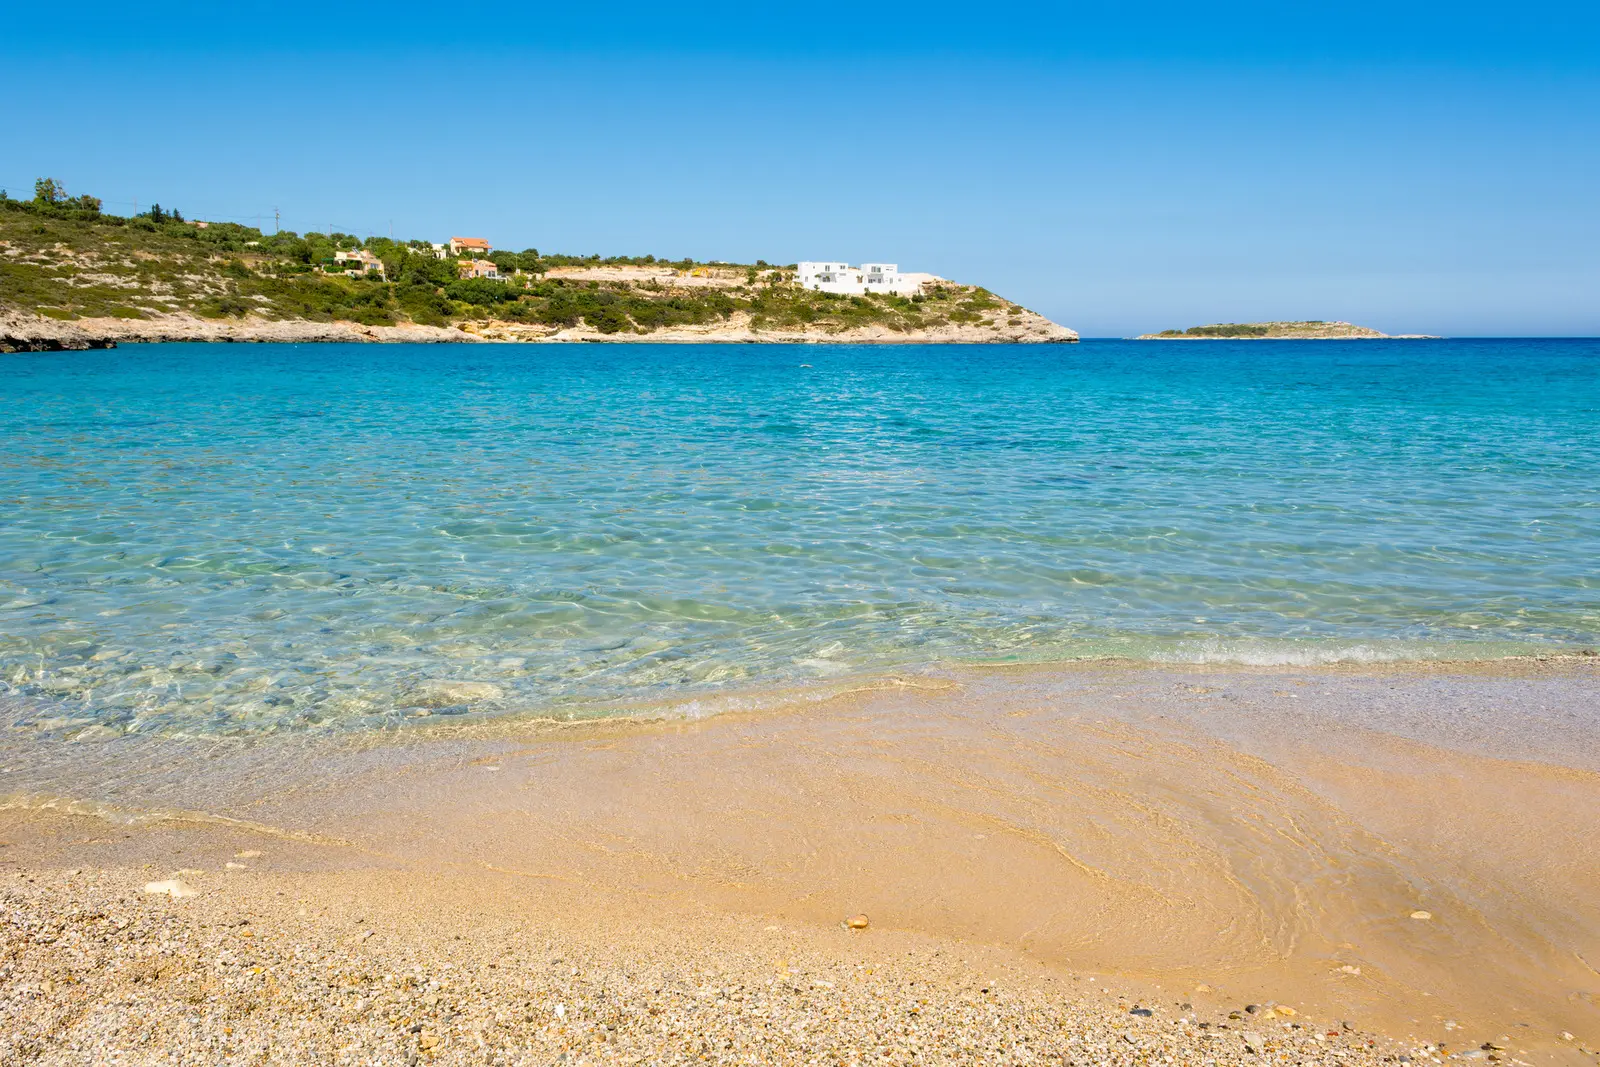 Golden sand and shallow turquoise water with a green headland in the background, Marathi Beach Chania